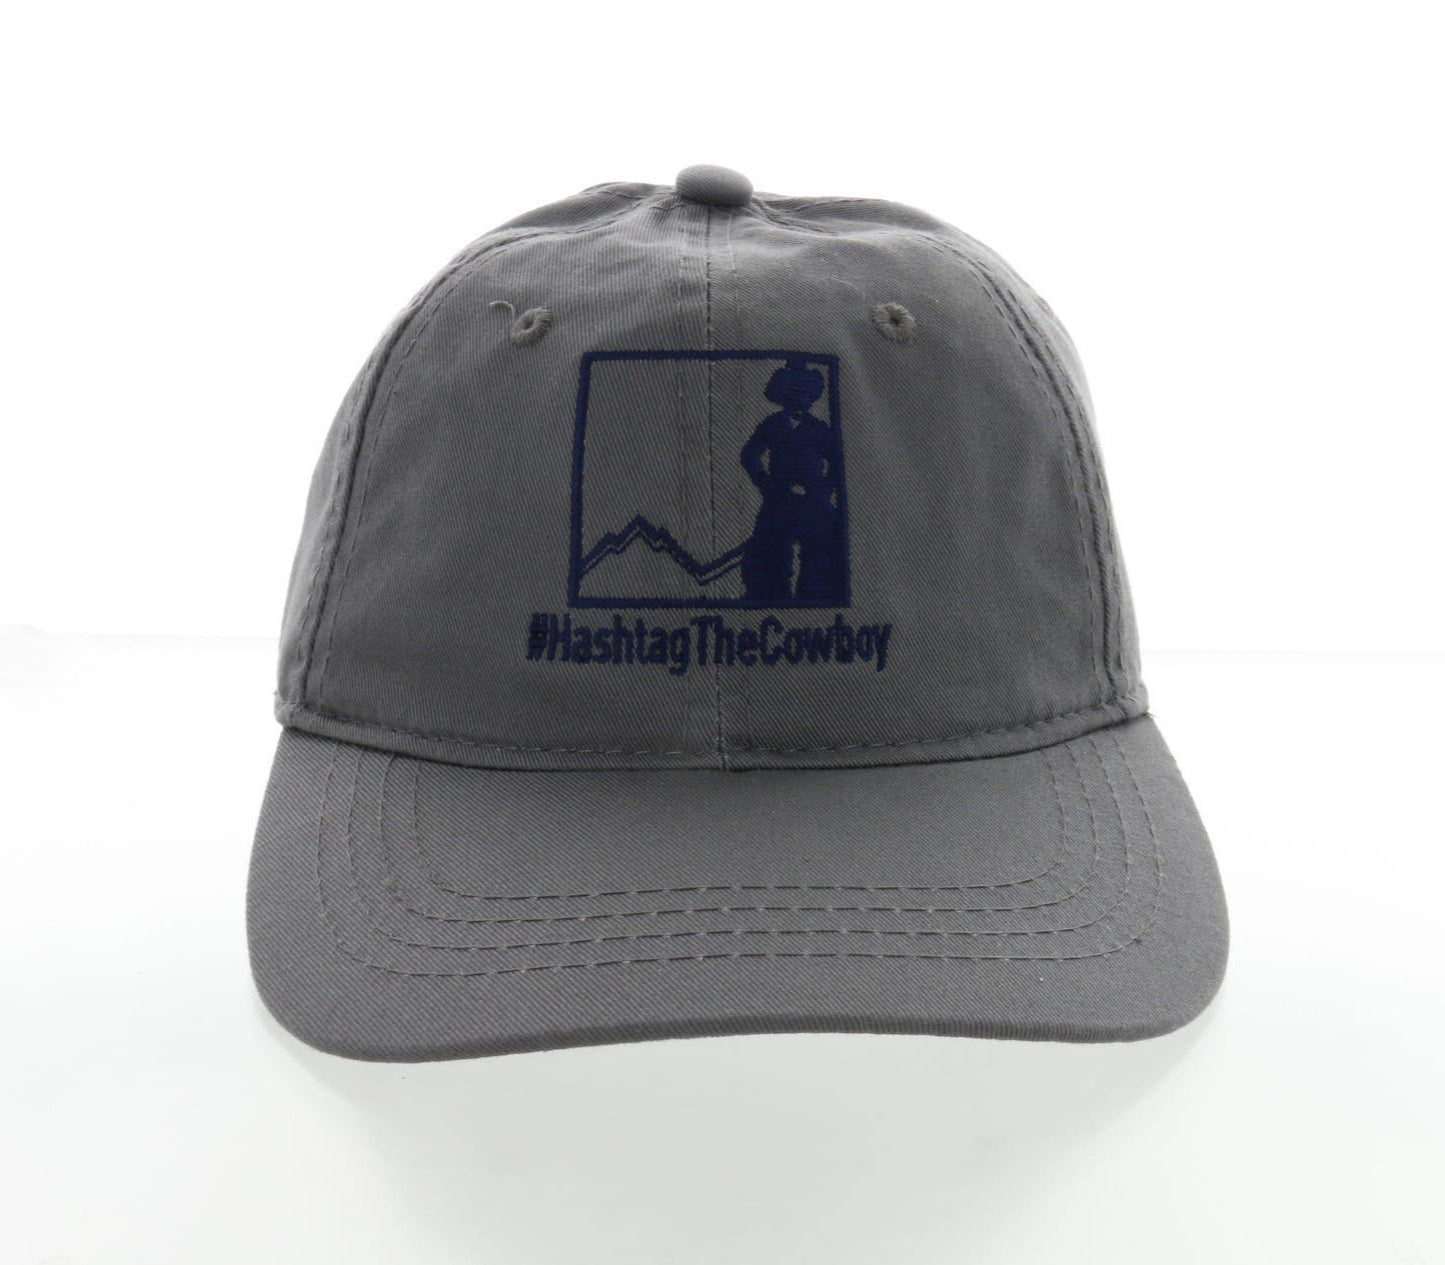 cotton twill baseball cap ball hat sun protection gray grey thanks, tim hashtag the cowboy national cowboy and western heritage museum logo